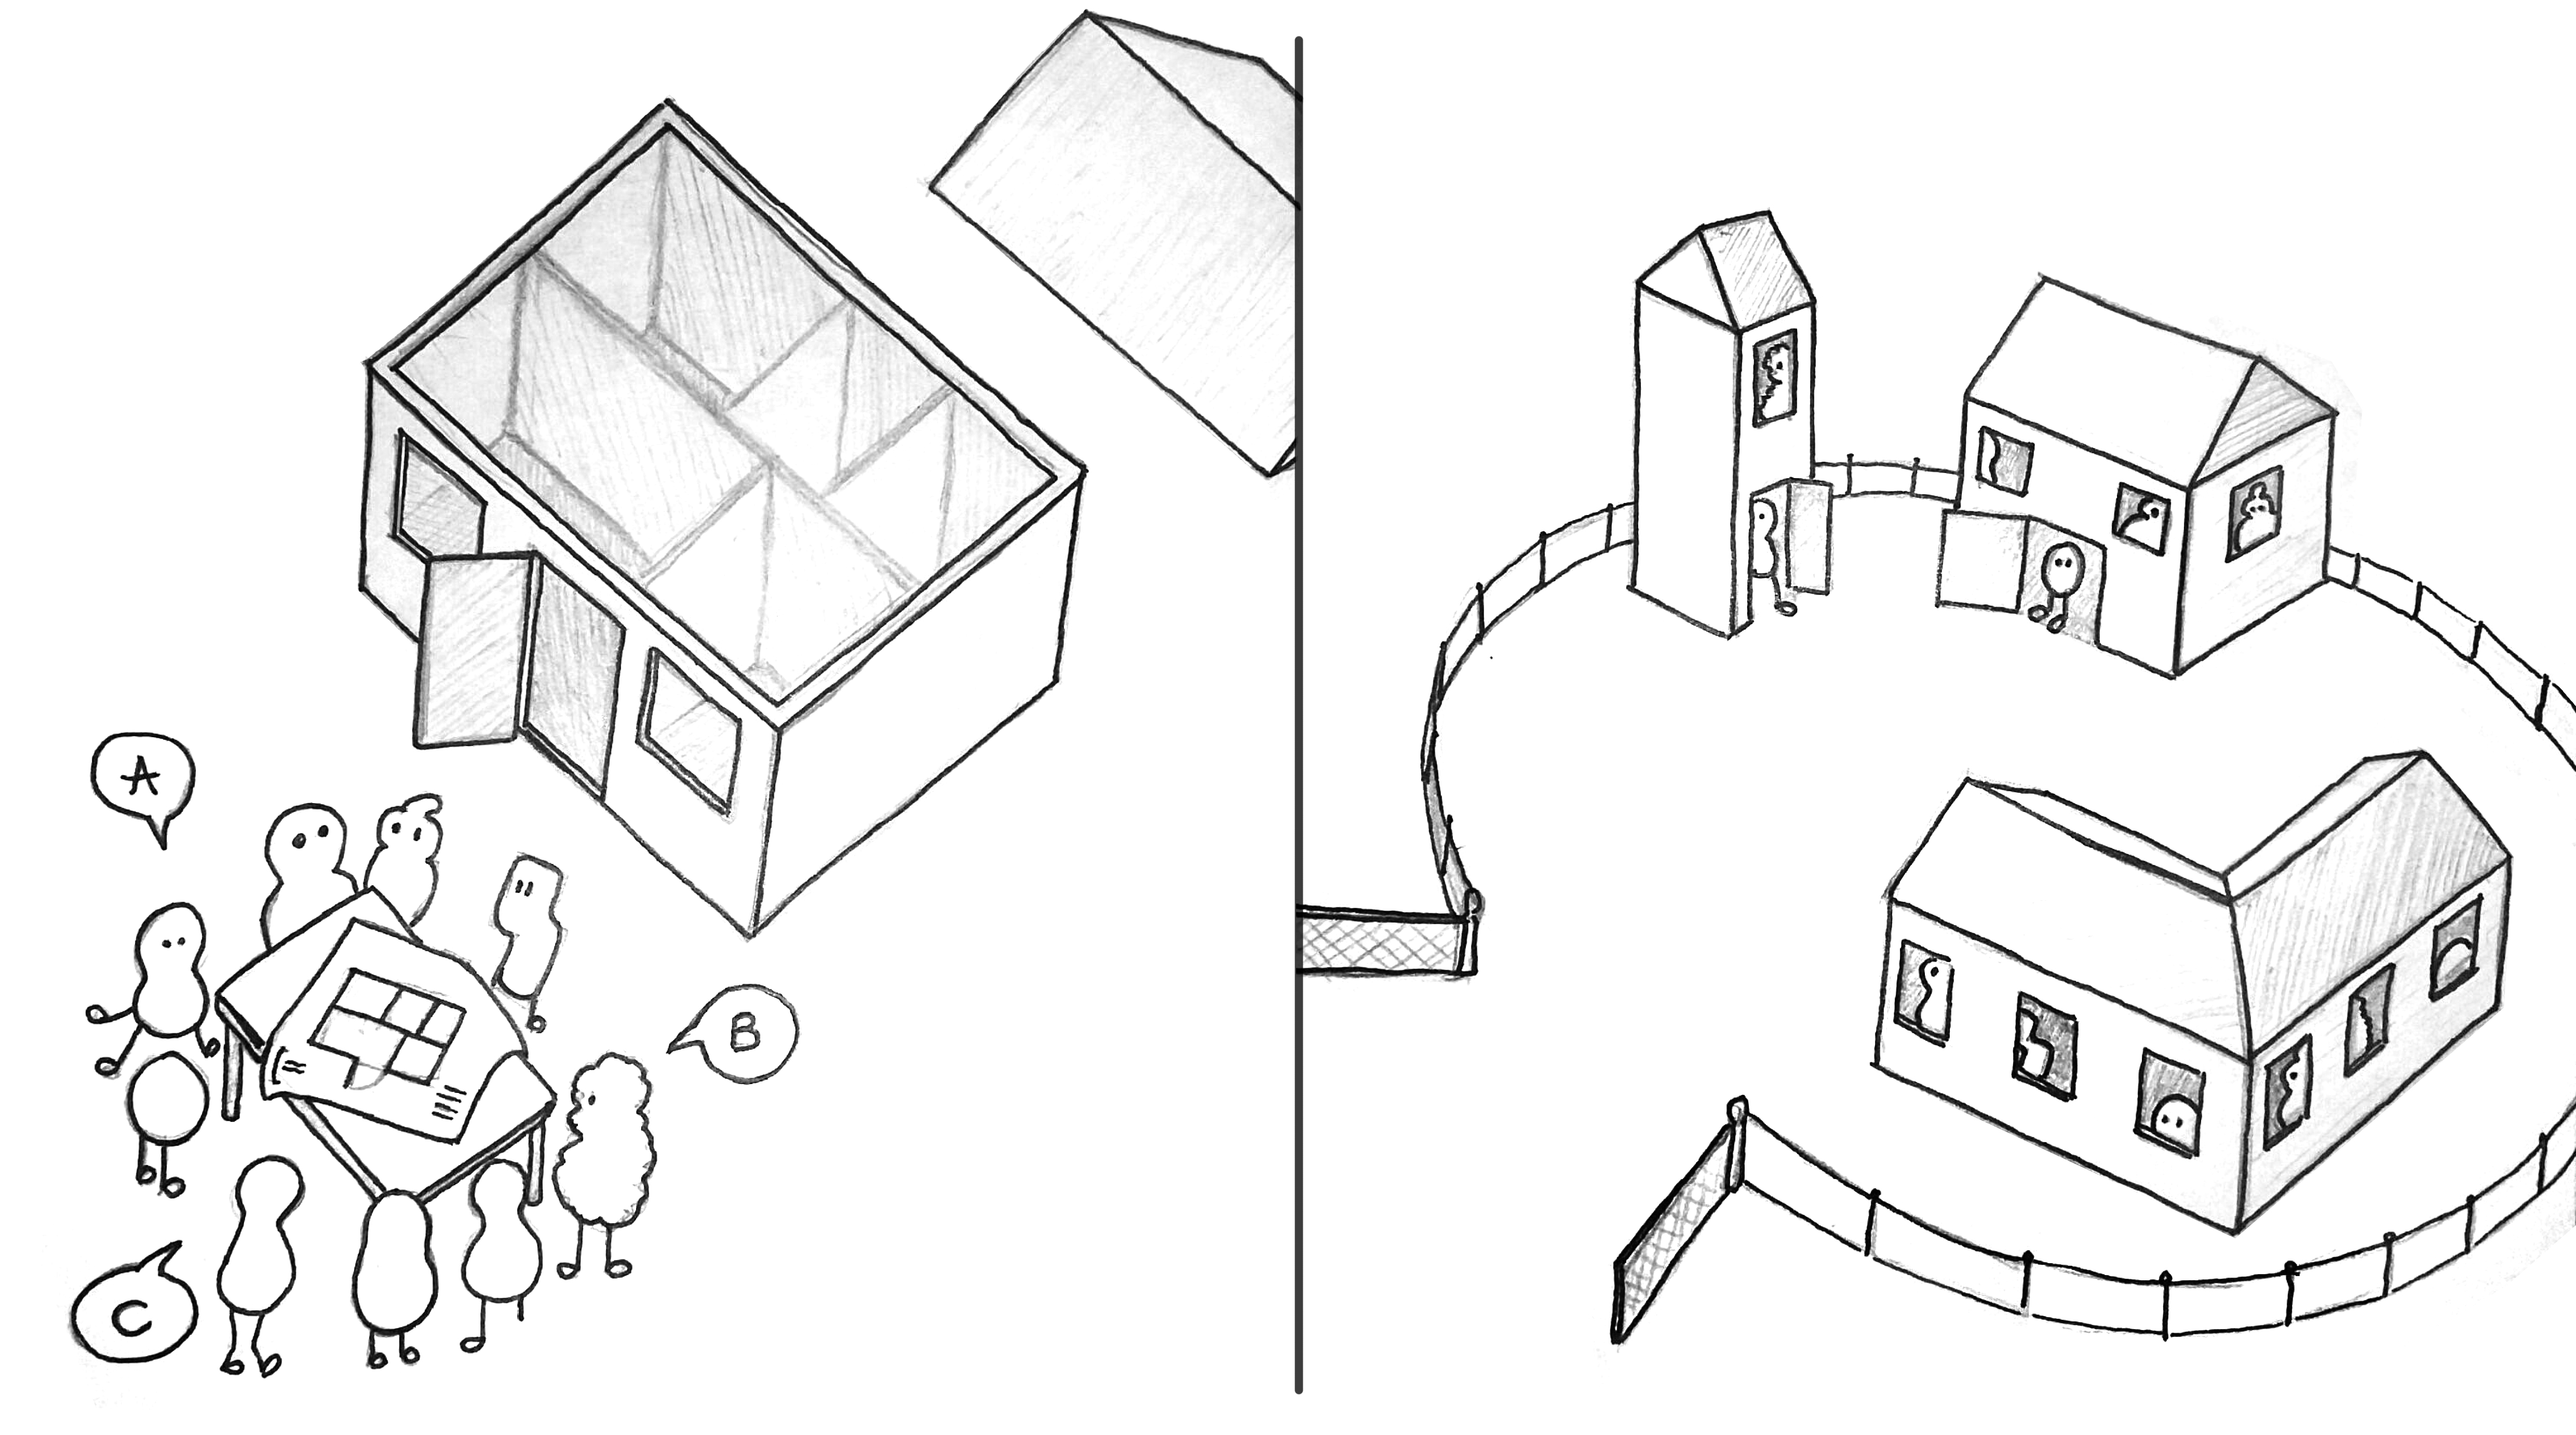 Illustration 1: All beings look together at how the house is built. Illustration 2: There are now different houses that fulfil everyones needs.